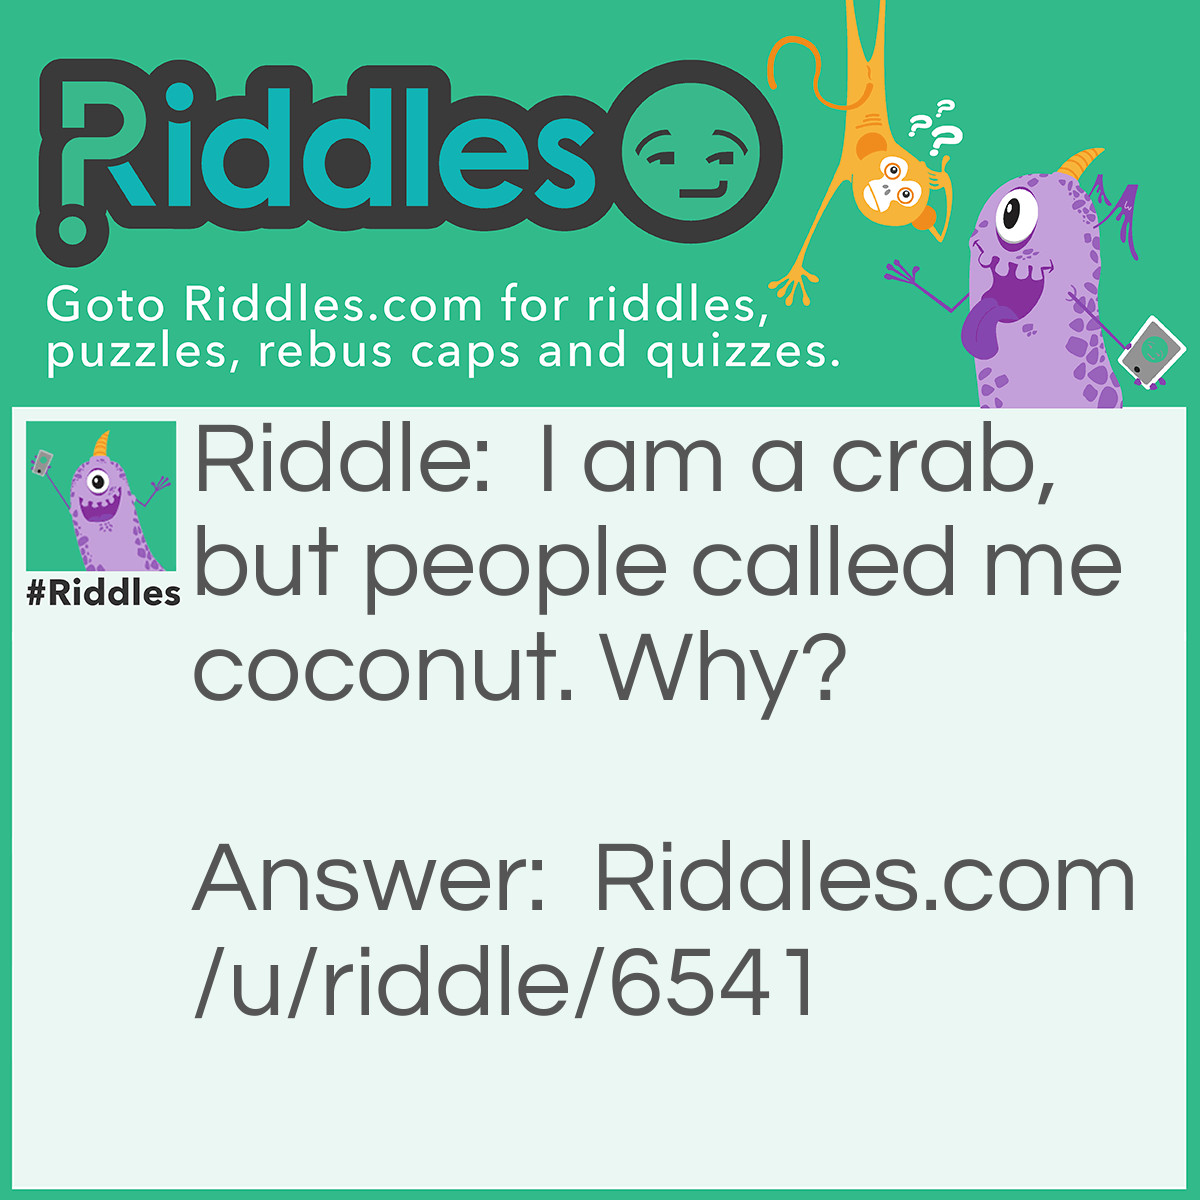 Riddle: I am a crab, but people called me coconut. Why? Answer: Coconut crab.